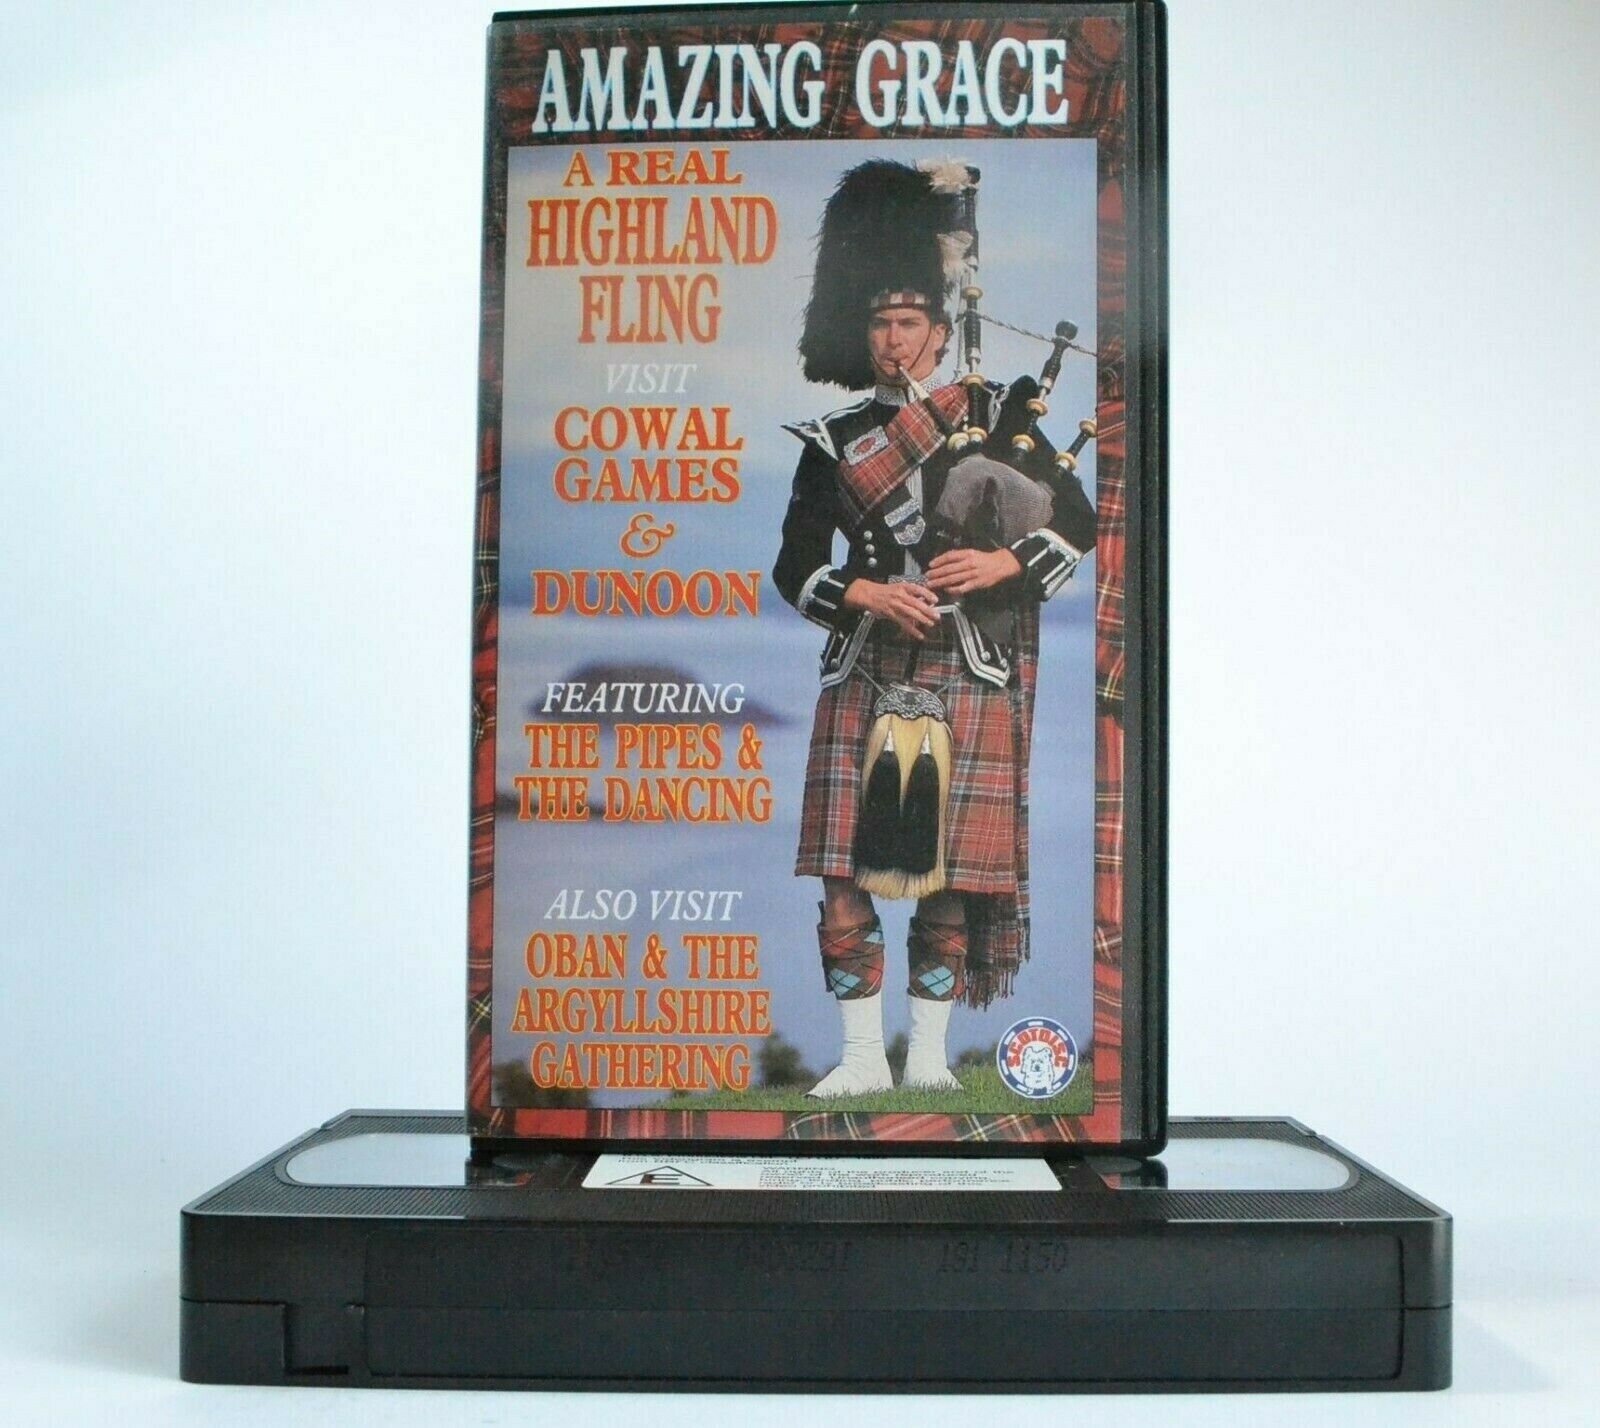 Amazing Grace: A Real Highland Fling - Cowal Games And Dunoon - Music - Pal VHS-